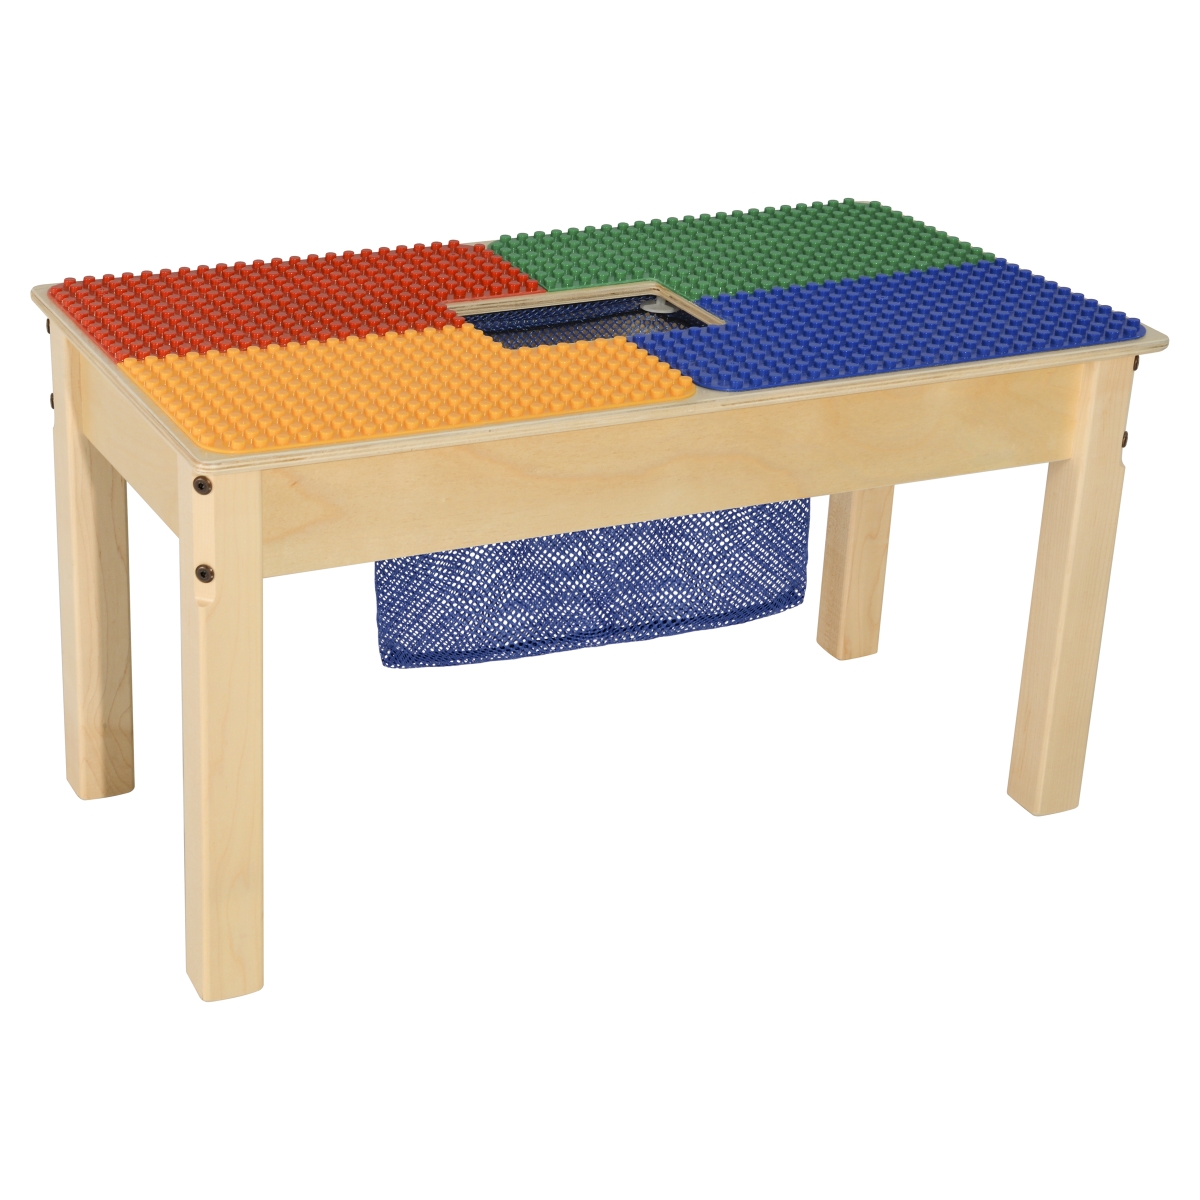 Tp1631pgn20 20 In. Duplo Compatible Rectangle Table With Legs, Multi Color